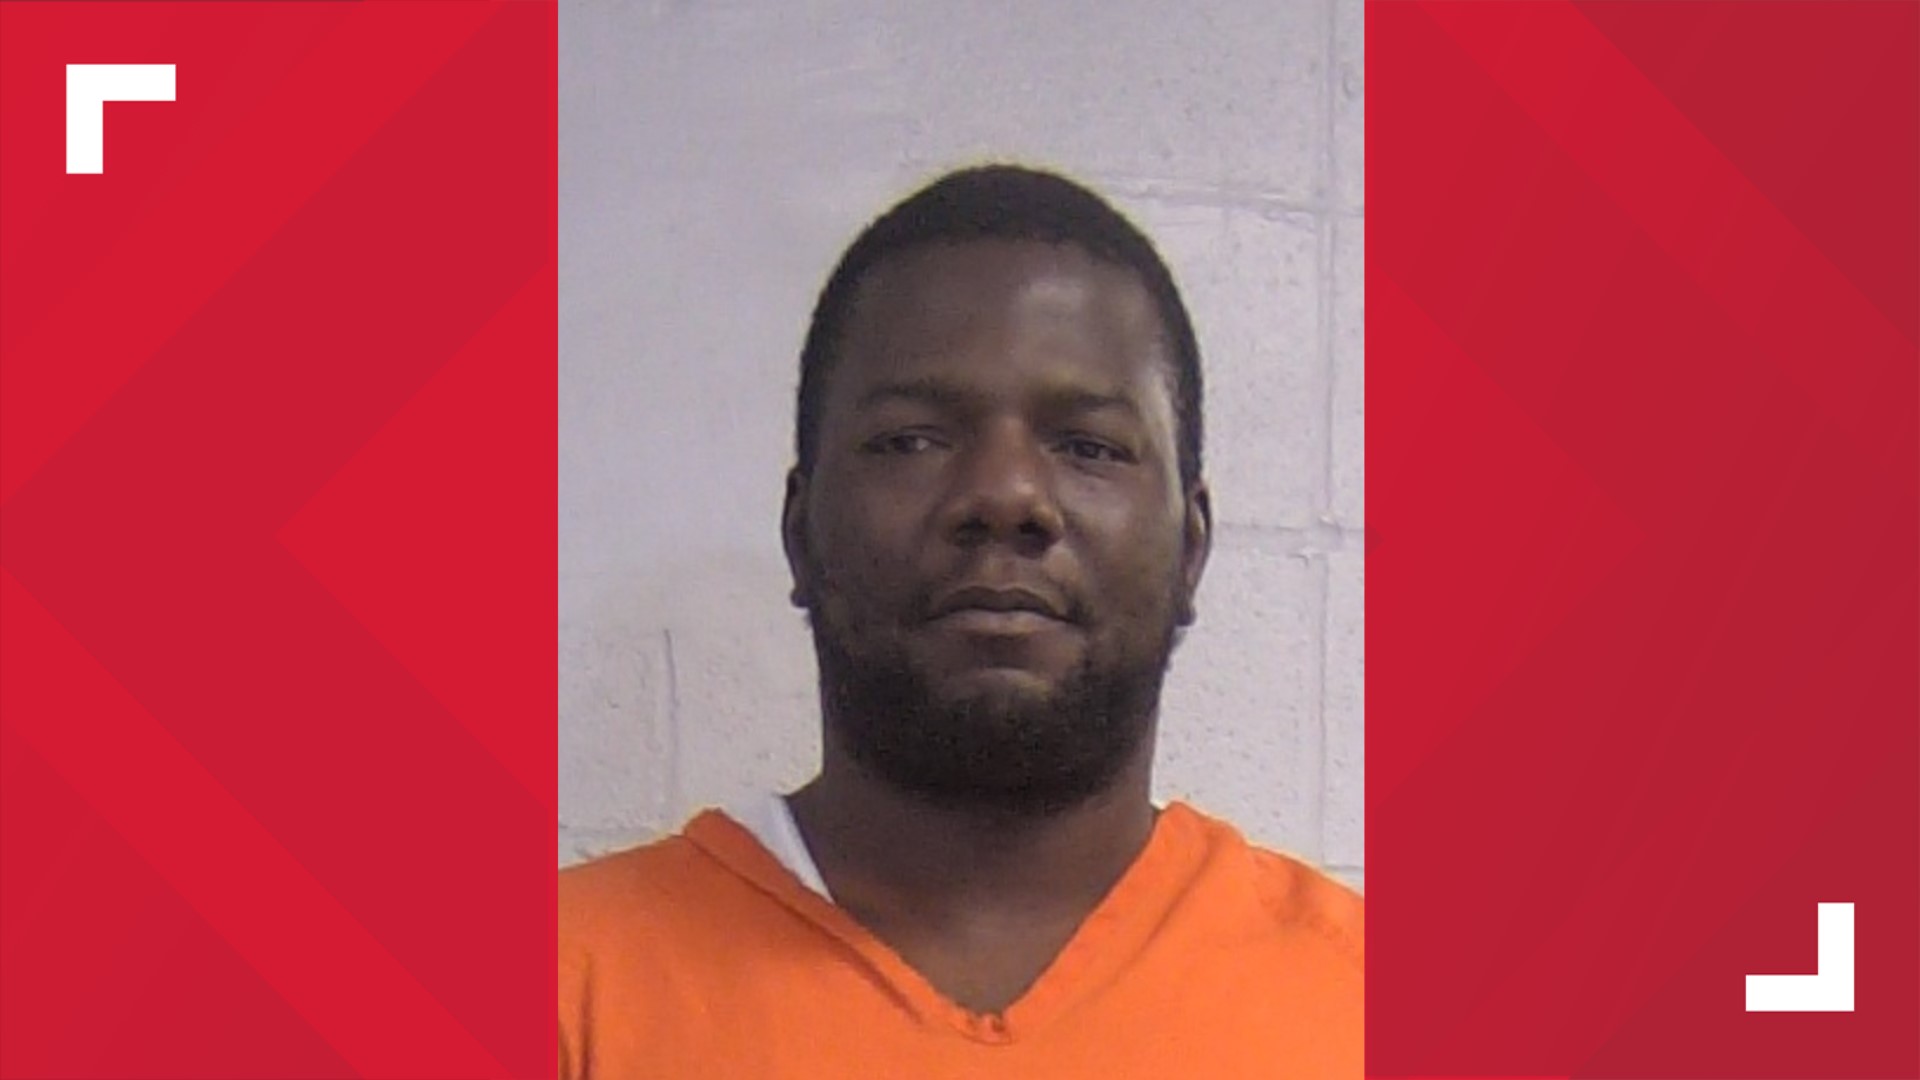 LMPD arrested 38-year-old Arthur Simson Friday. Police believe he was the “primary aggressor” during this shooting in downtown Louisville.